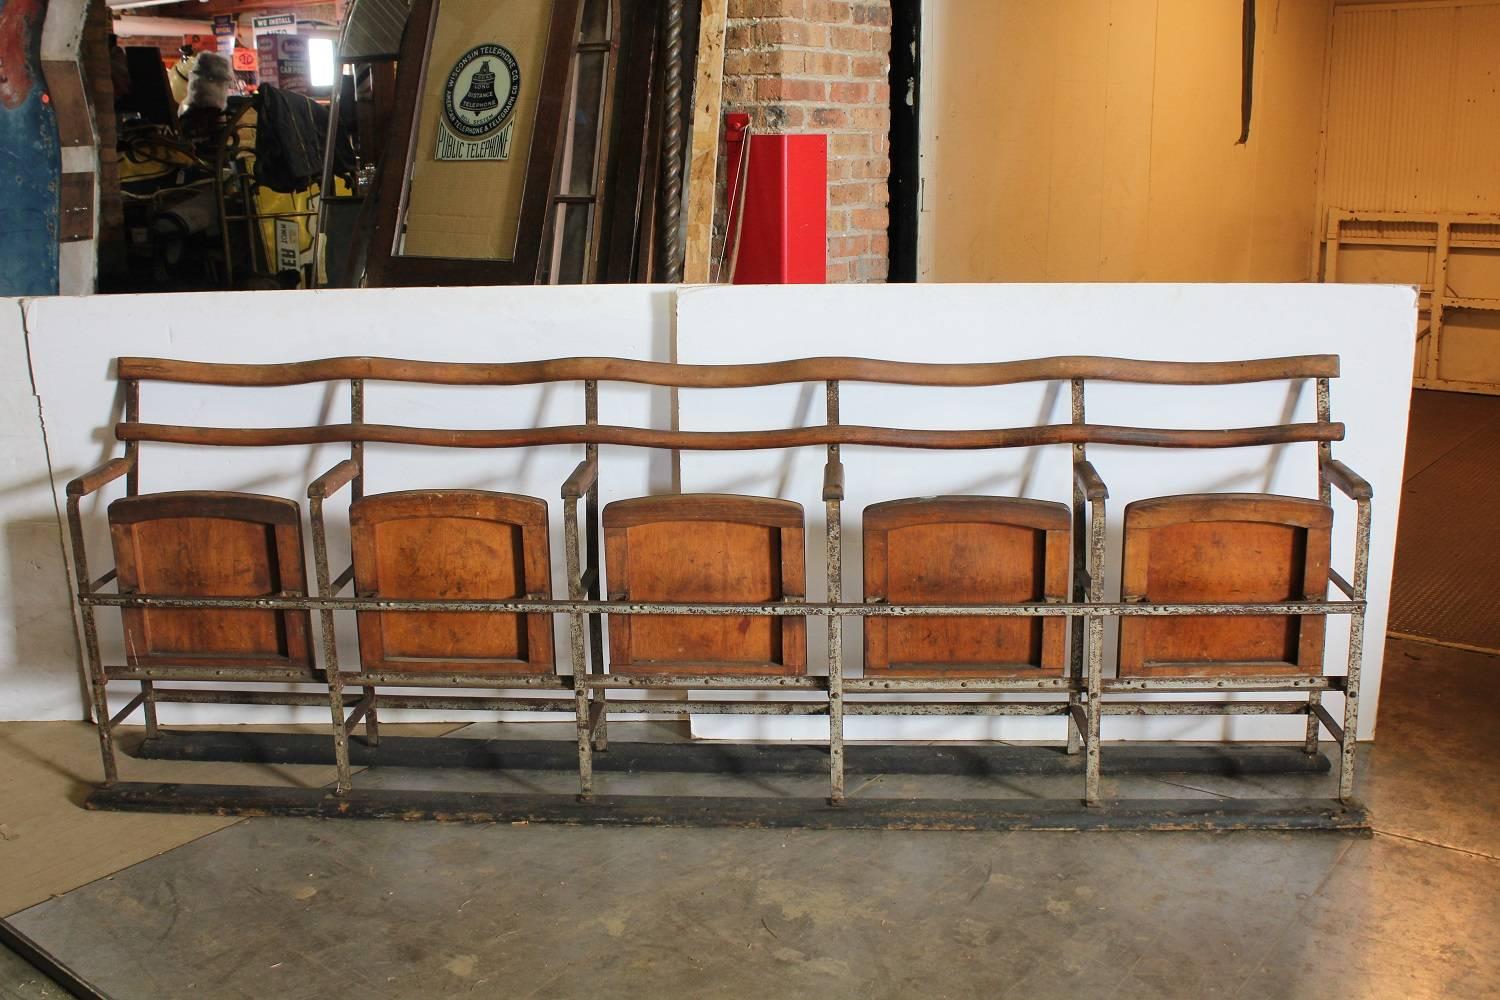 Antique theater five-seat folding bench.